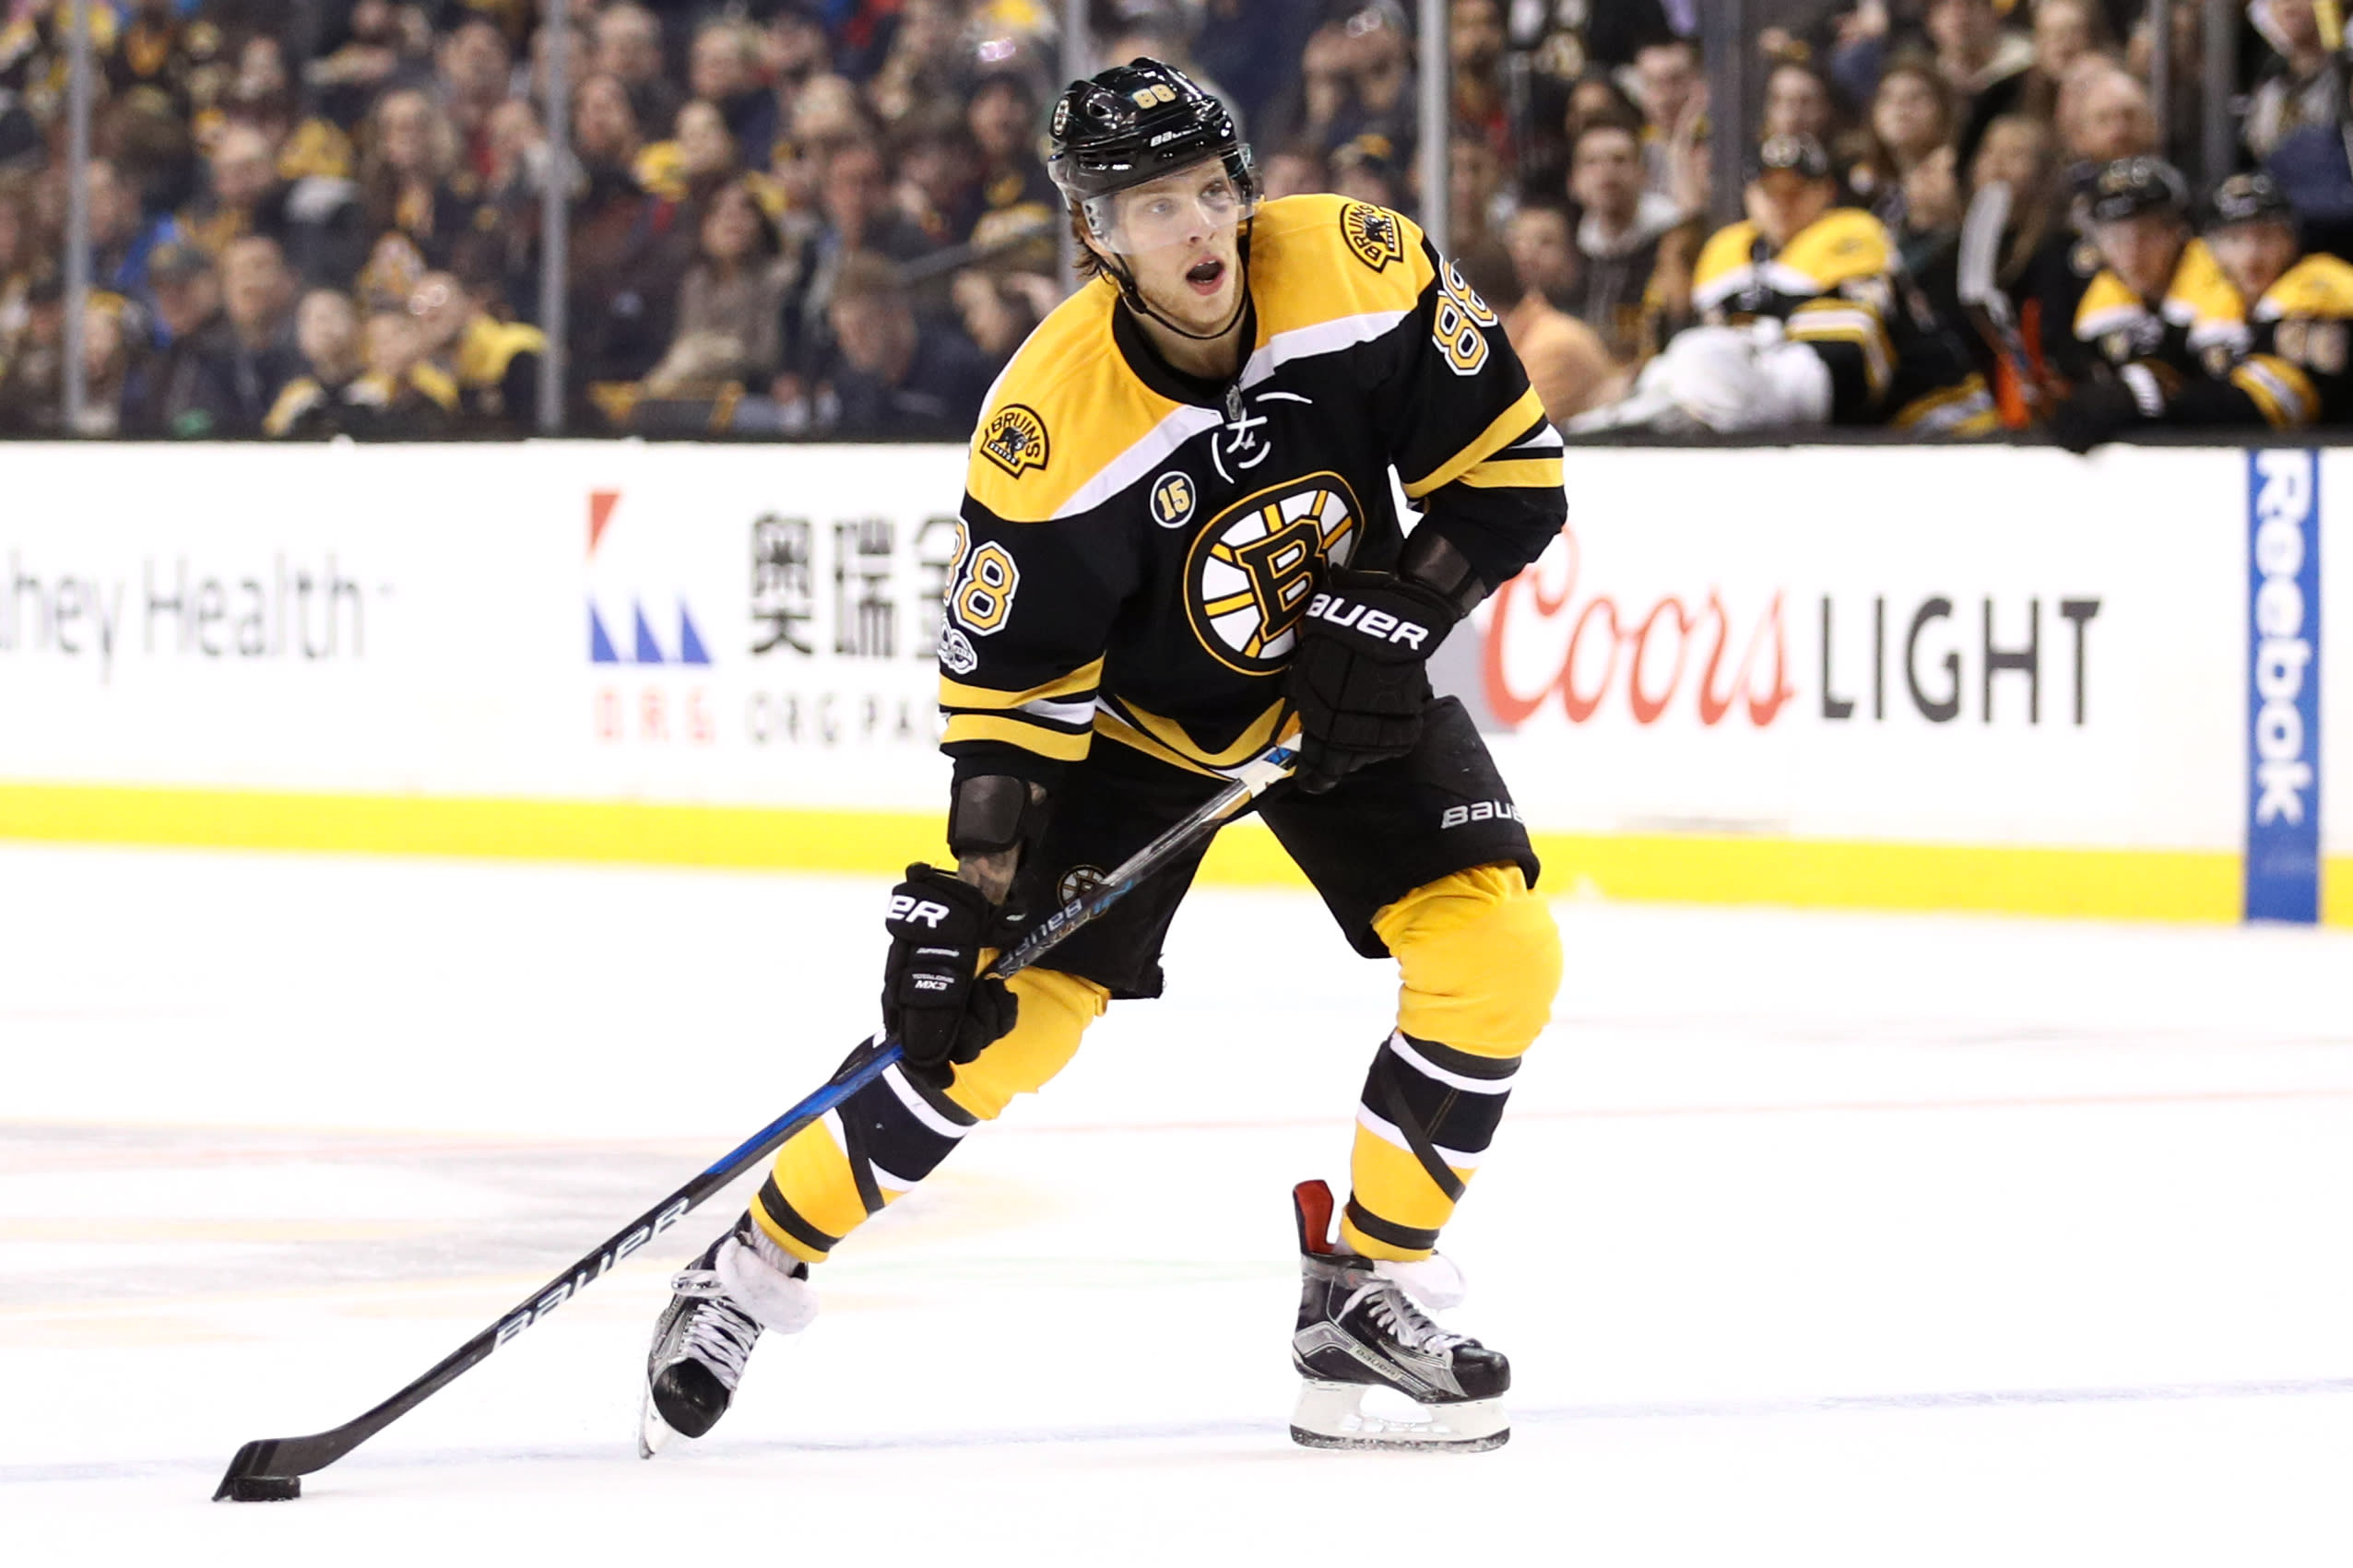 David Pastrnak and Bruins face huge NHL contract